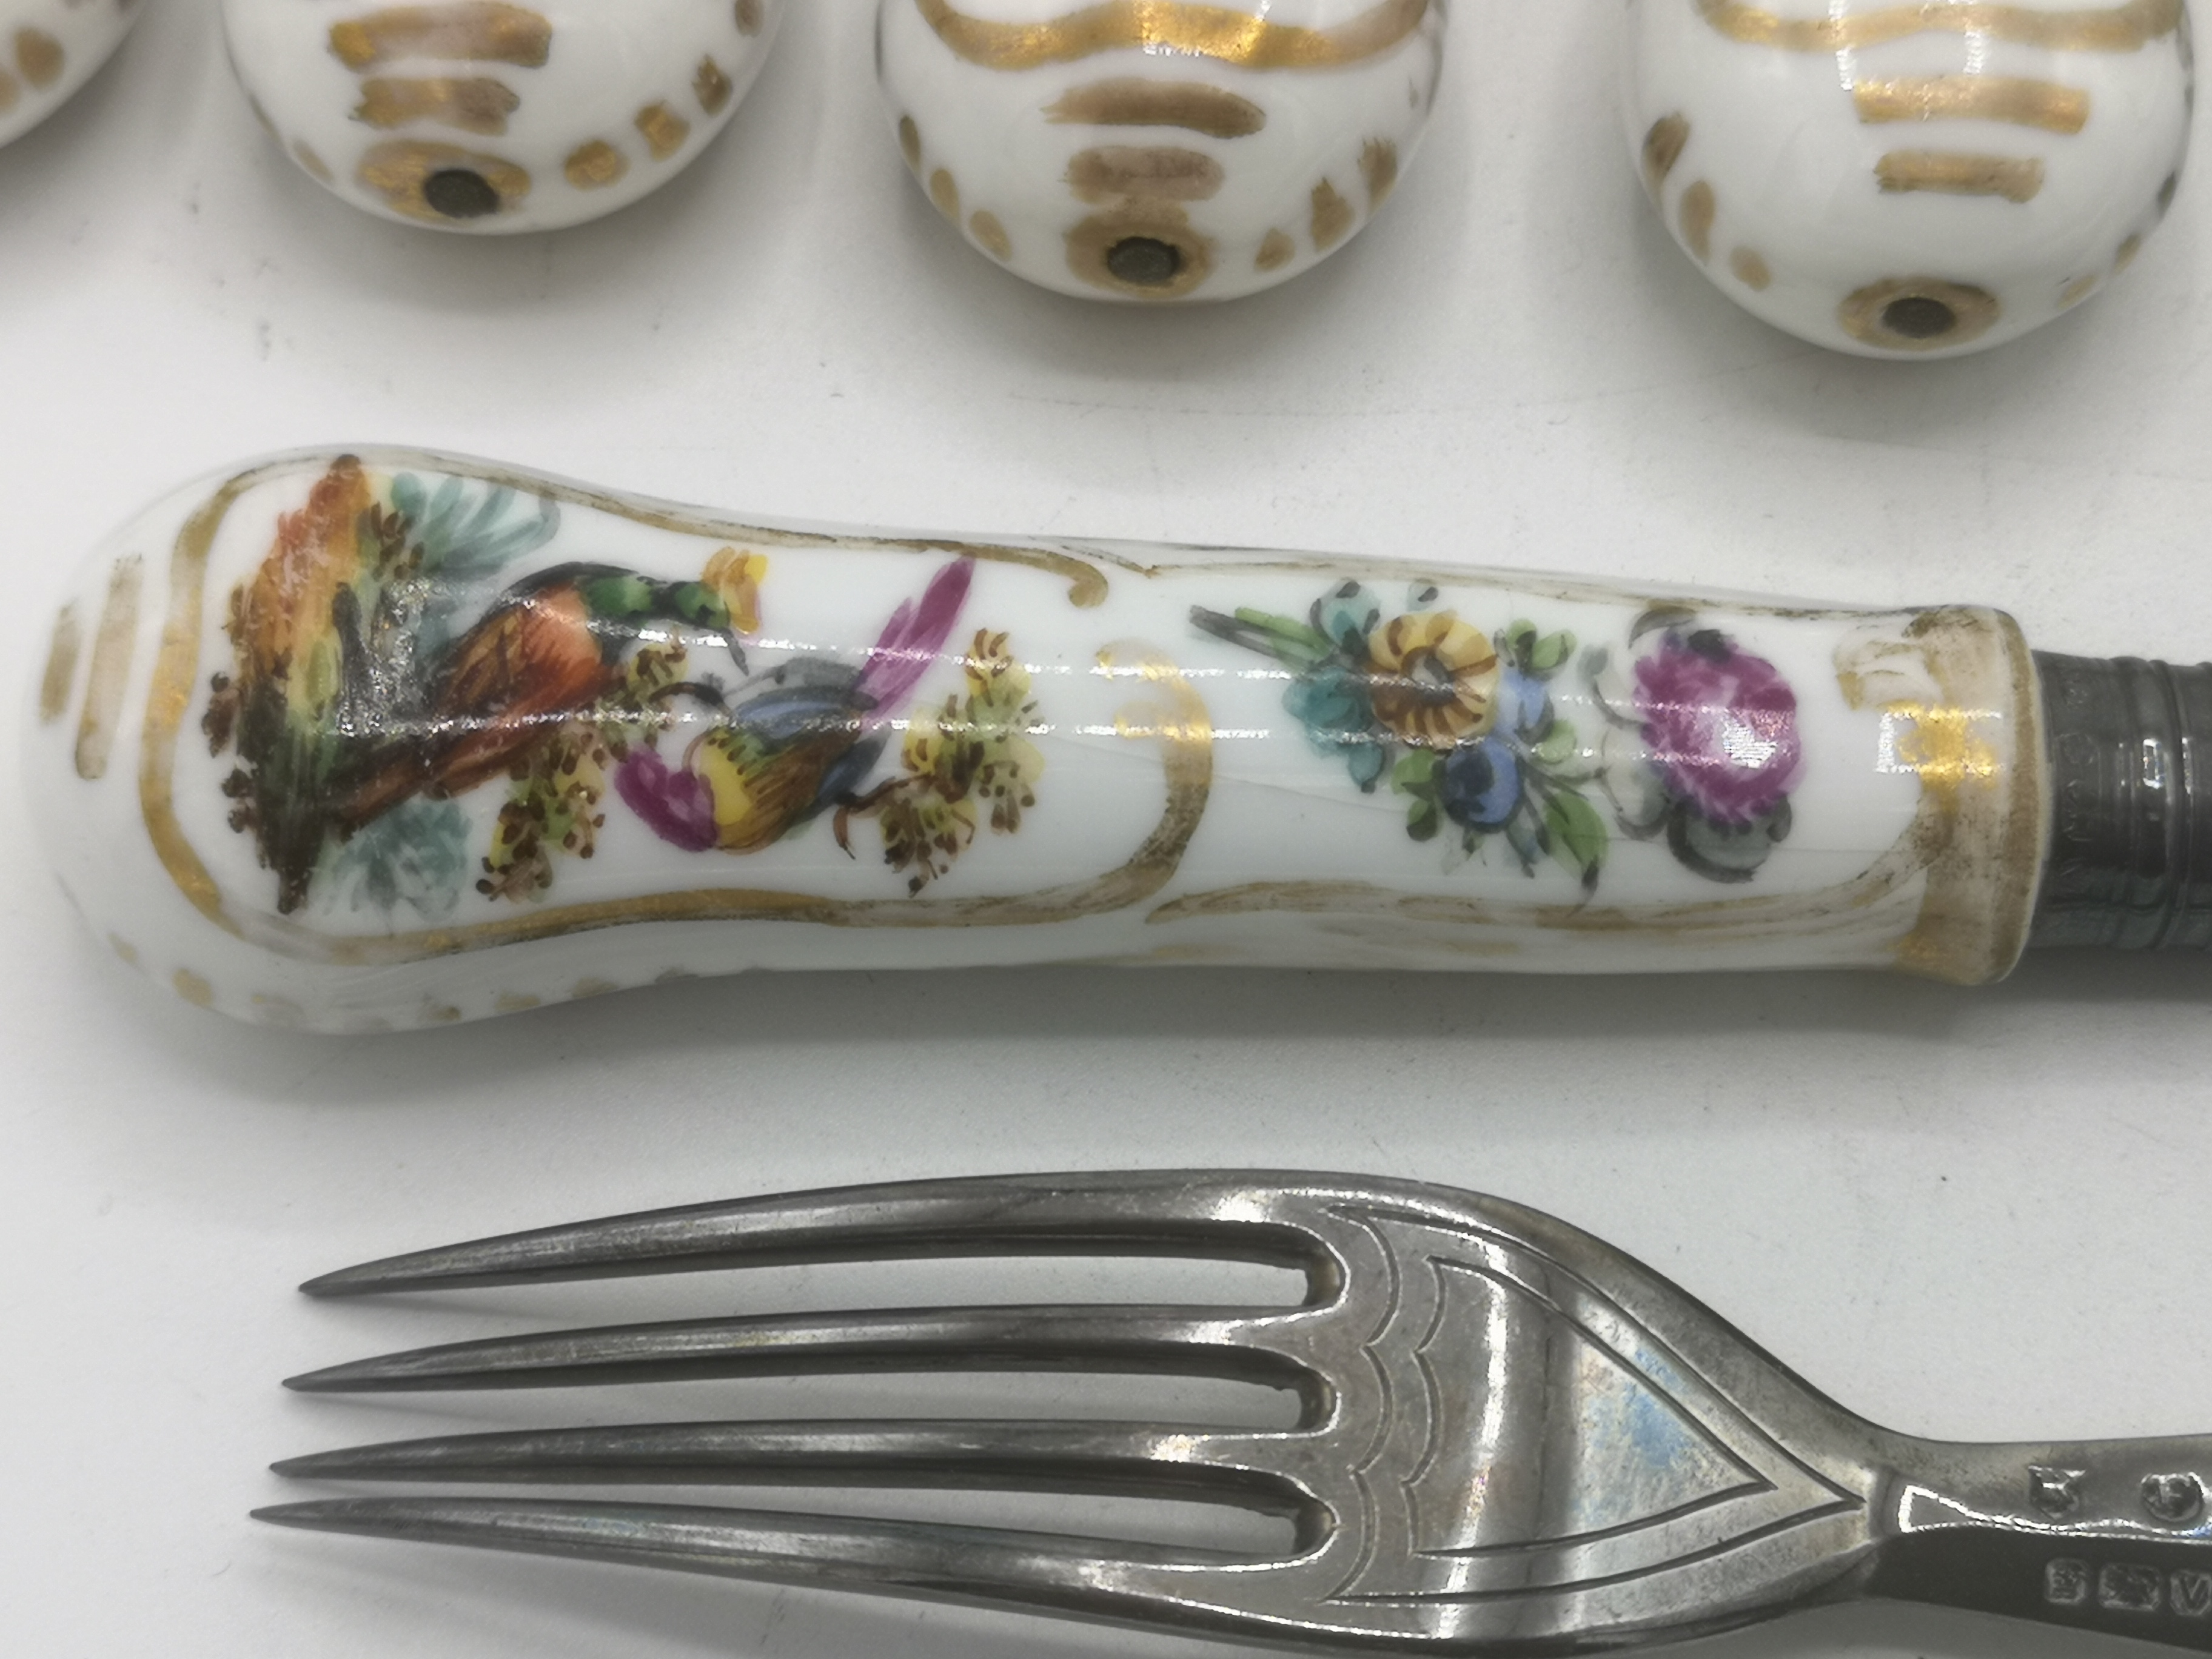 Ten fruit knives and forks with silver blades and tines - Image 19 of 19